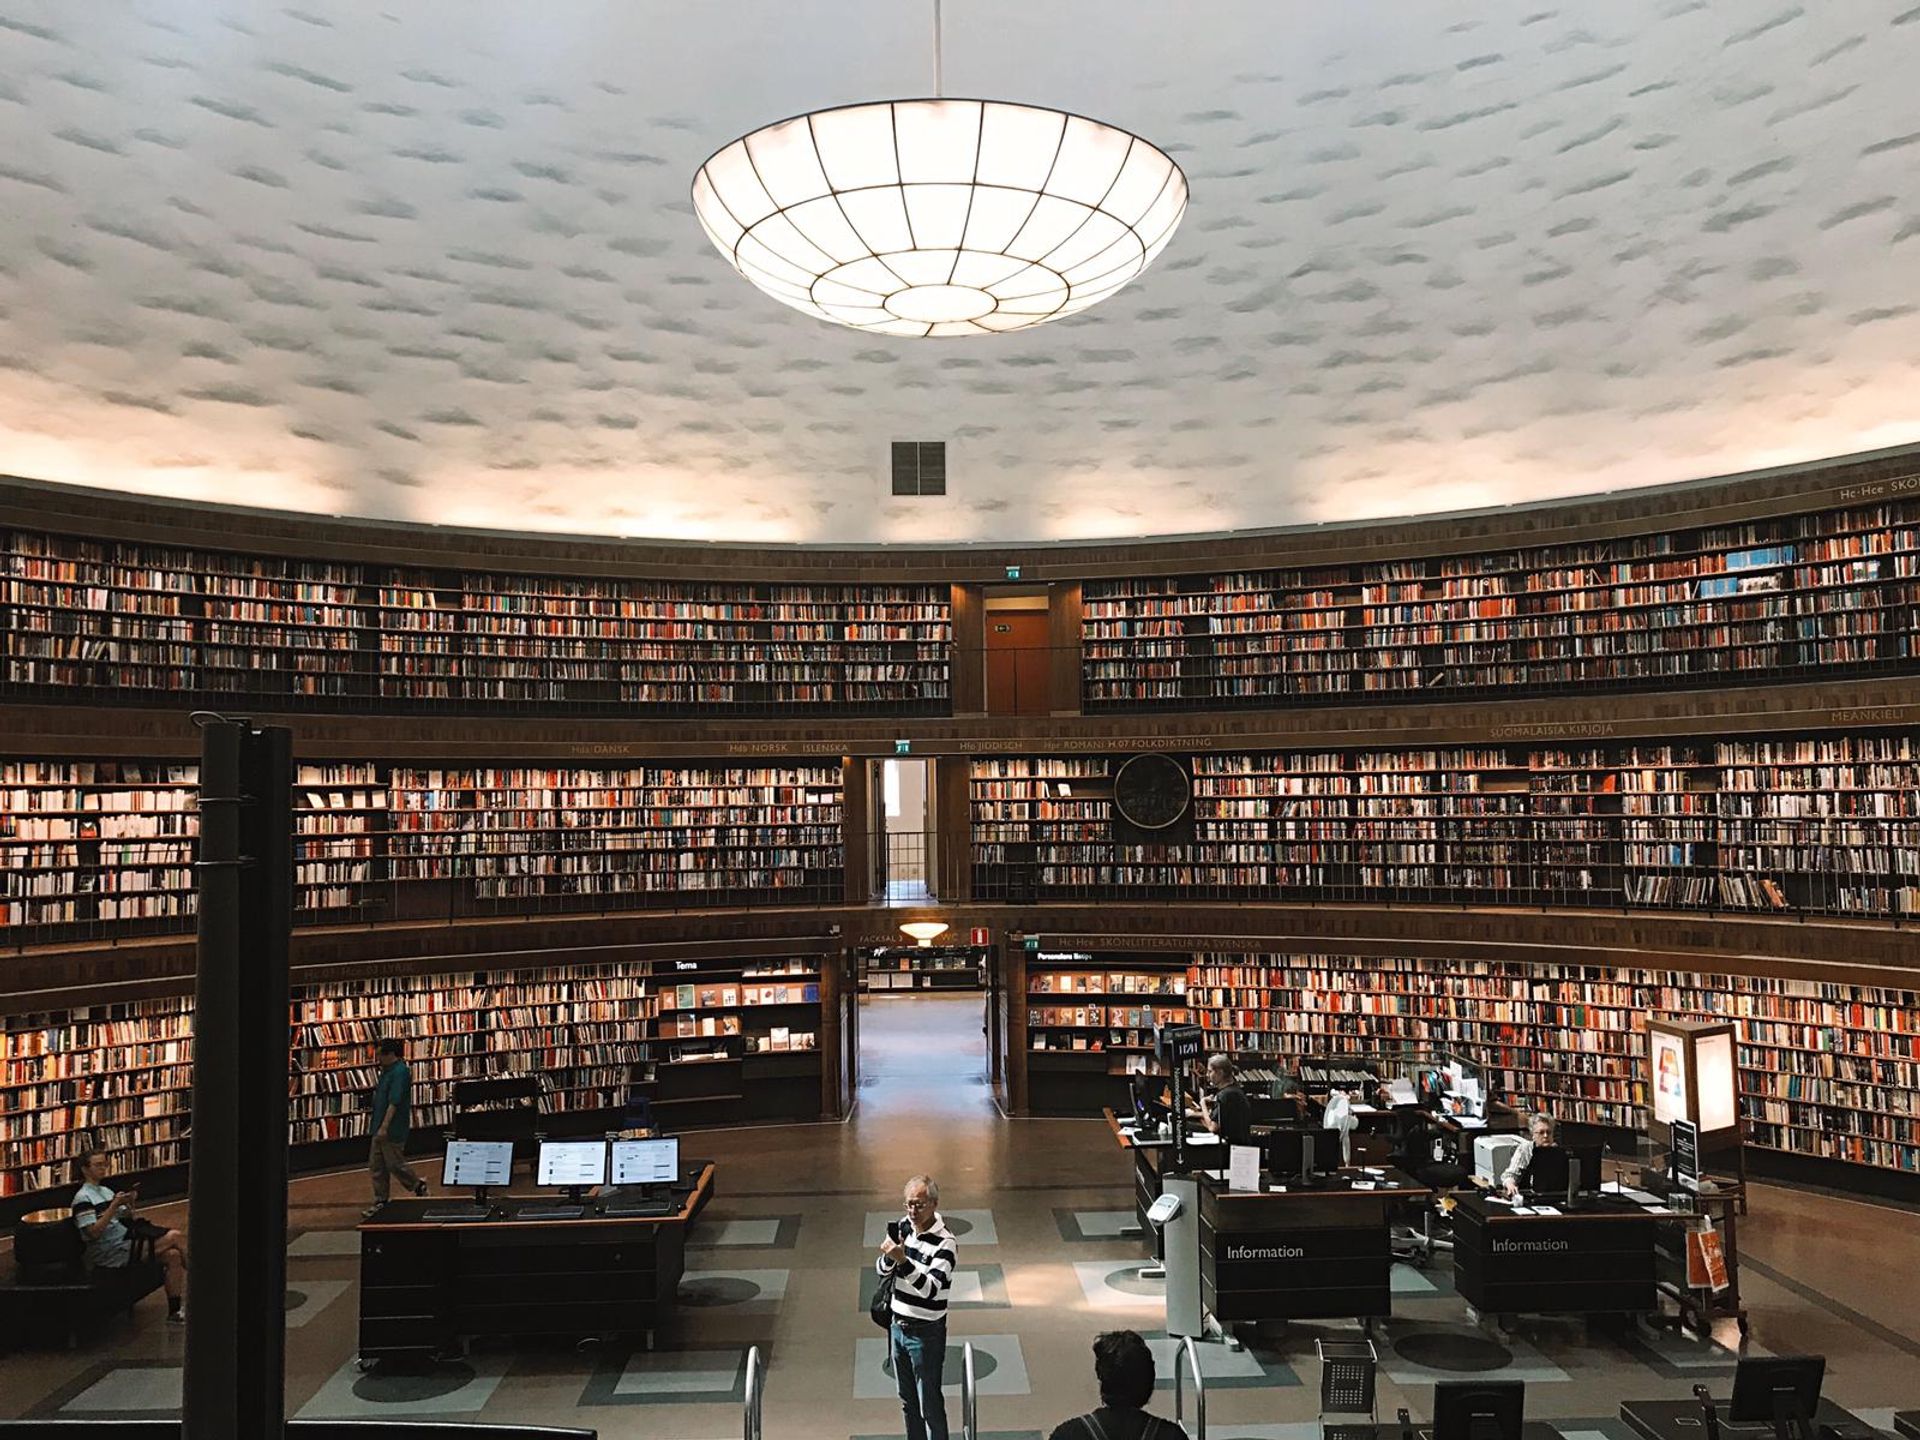 Inside the Stockholm Public Library.